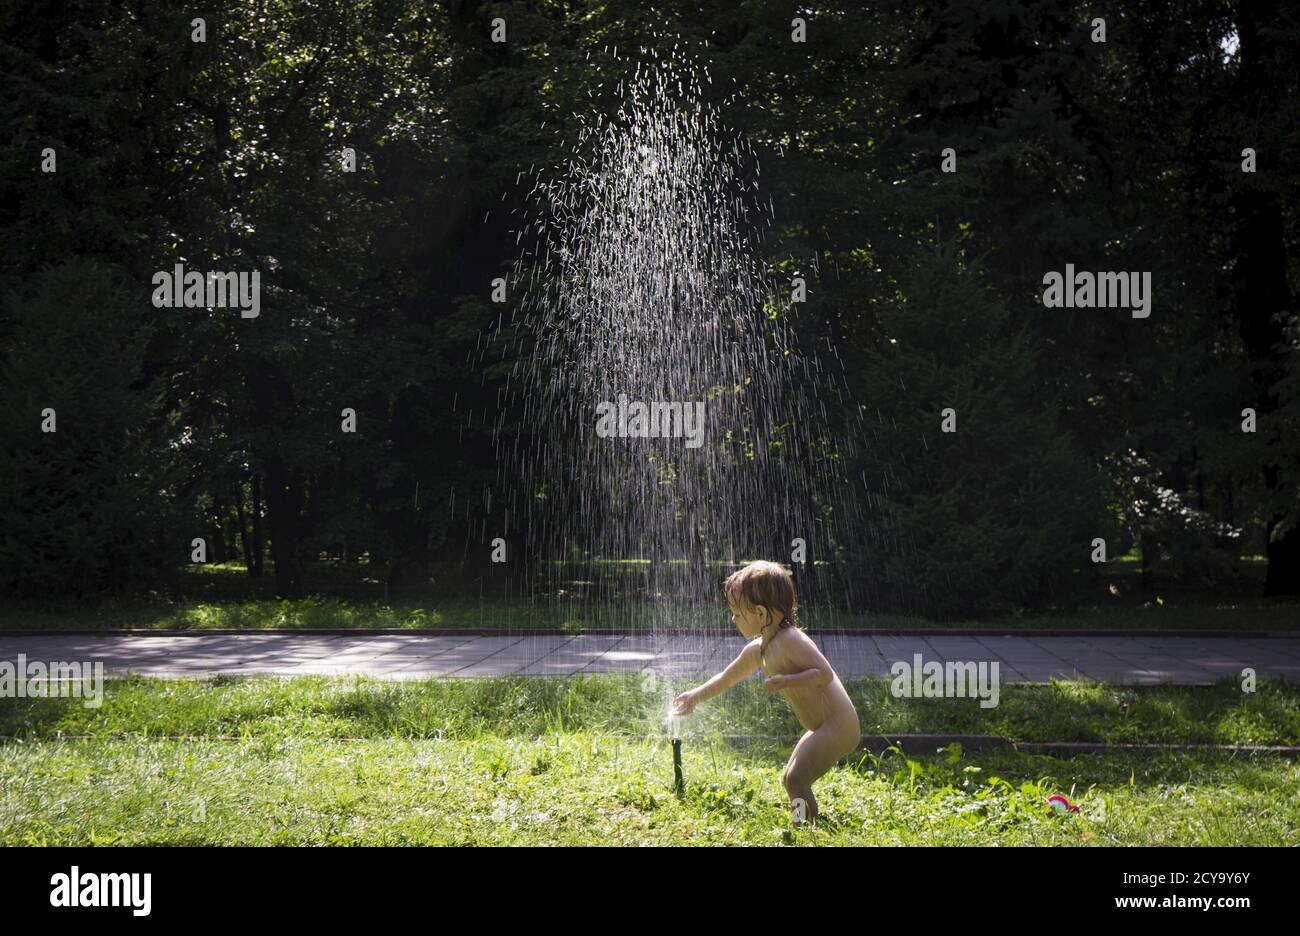 A child plays with a water sprinkler in a park during a a hot day in Almaty, Kazakhstan, July 16, 2015. The day temperature in Almaty reached 38 degrees Celsius (100 degrees Fahrenheit). REUTERS/Shamil Zhumatov Stock Photo